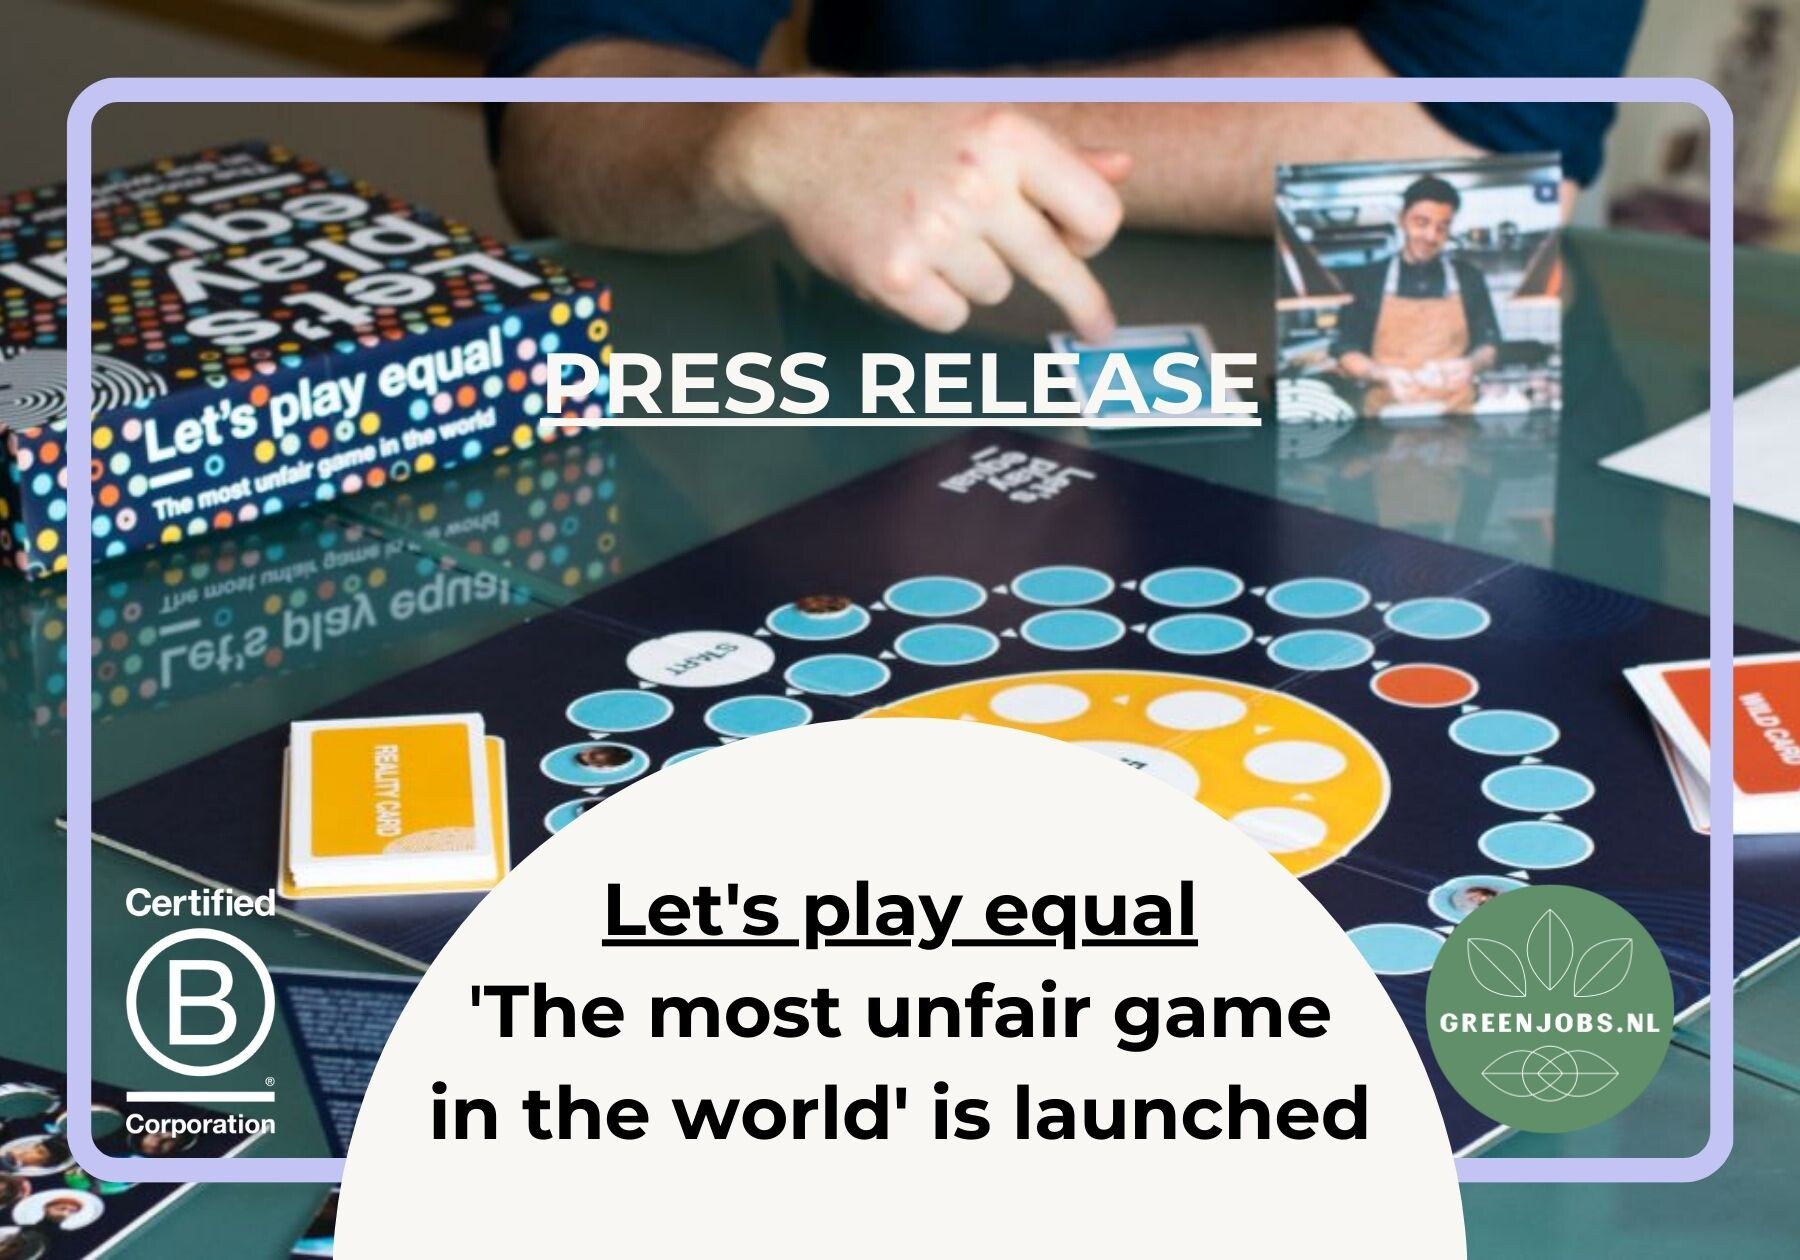 Press release: 'Let's Play Equal: The most unfair game in the world' is launched